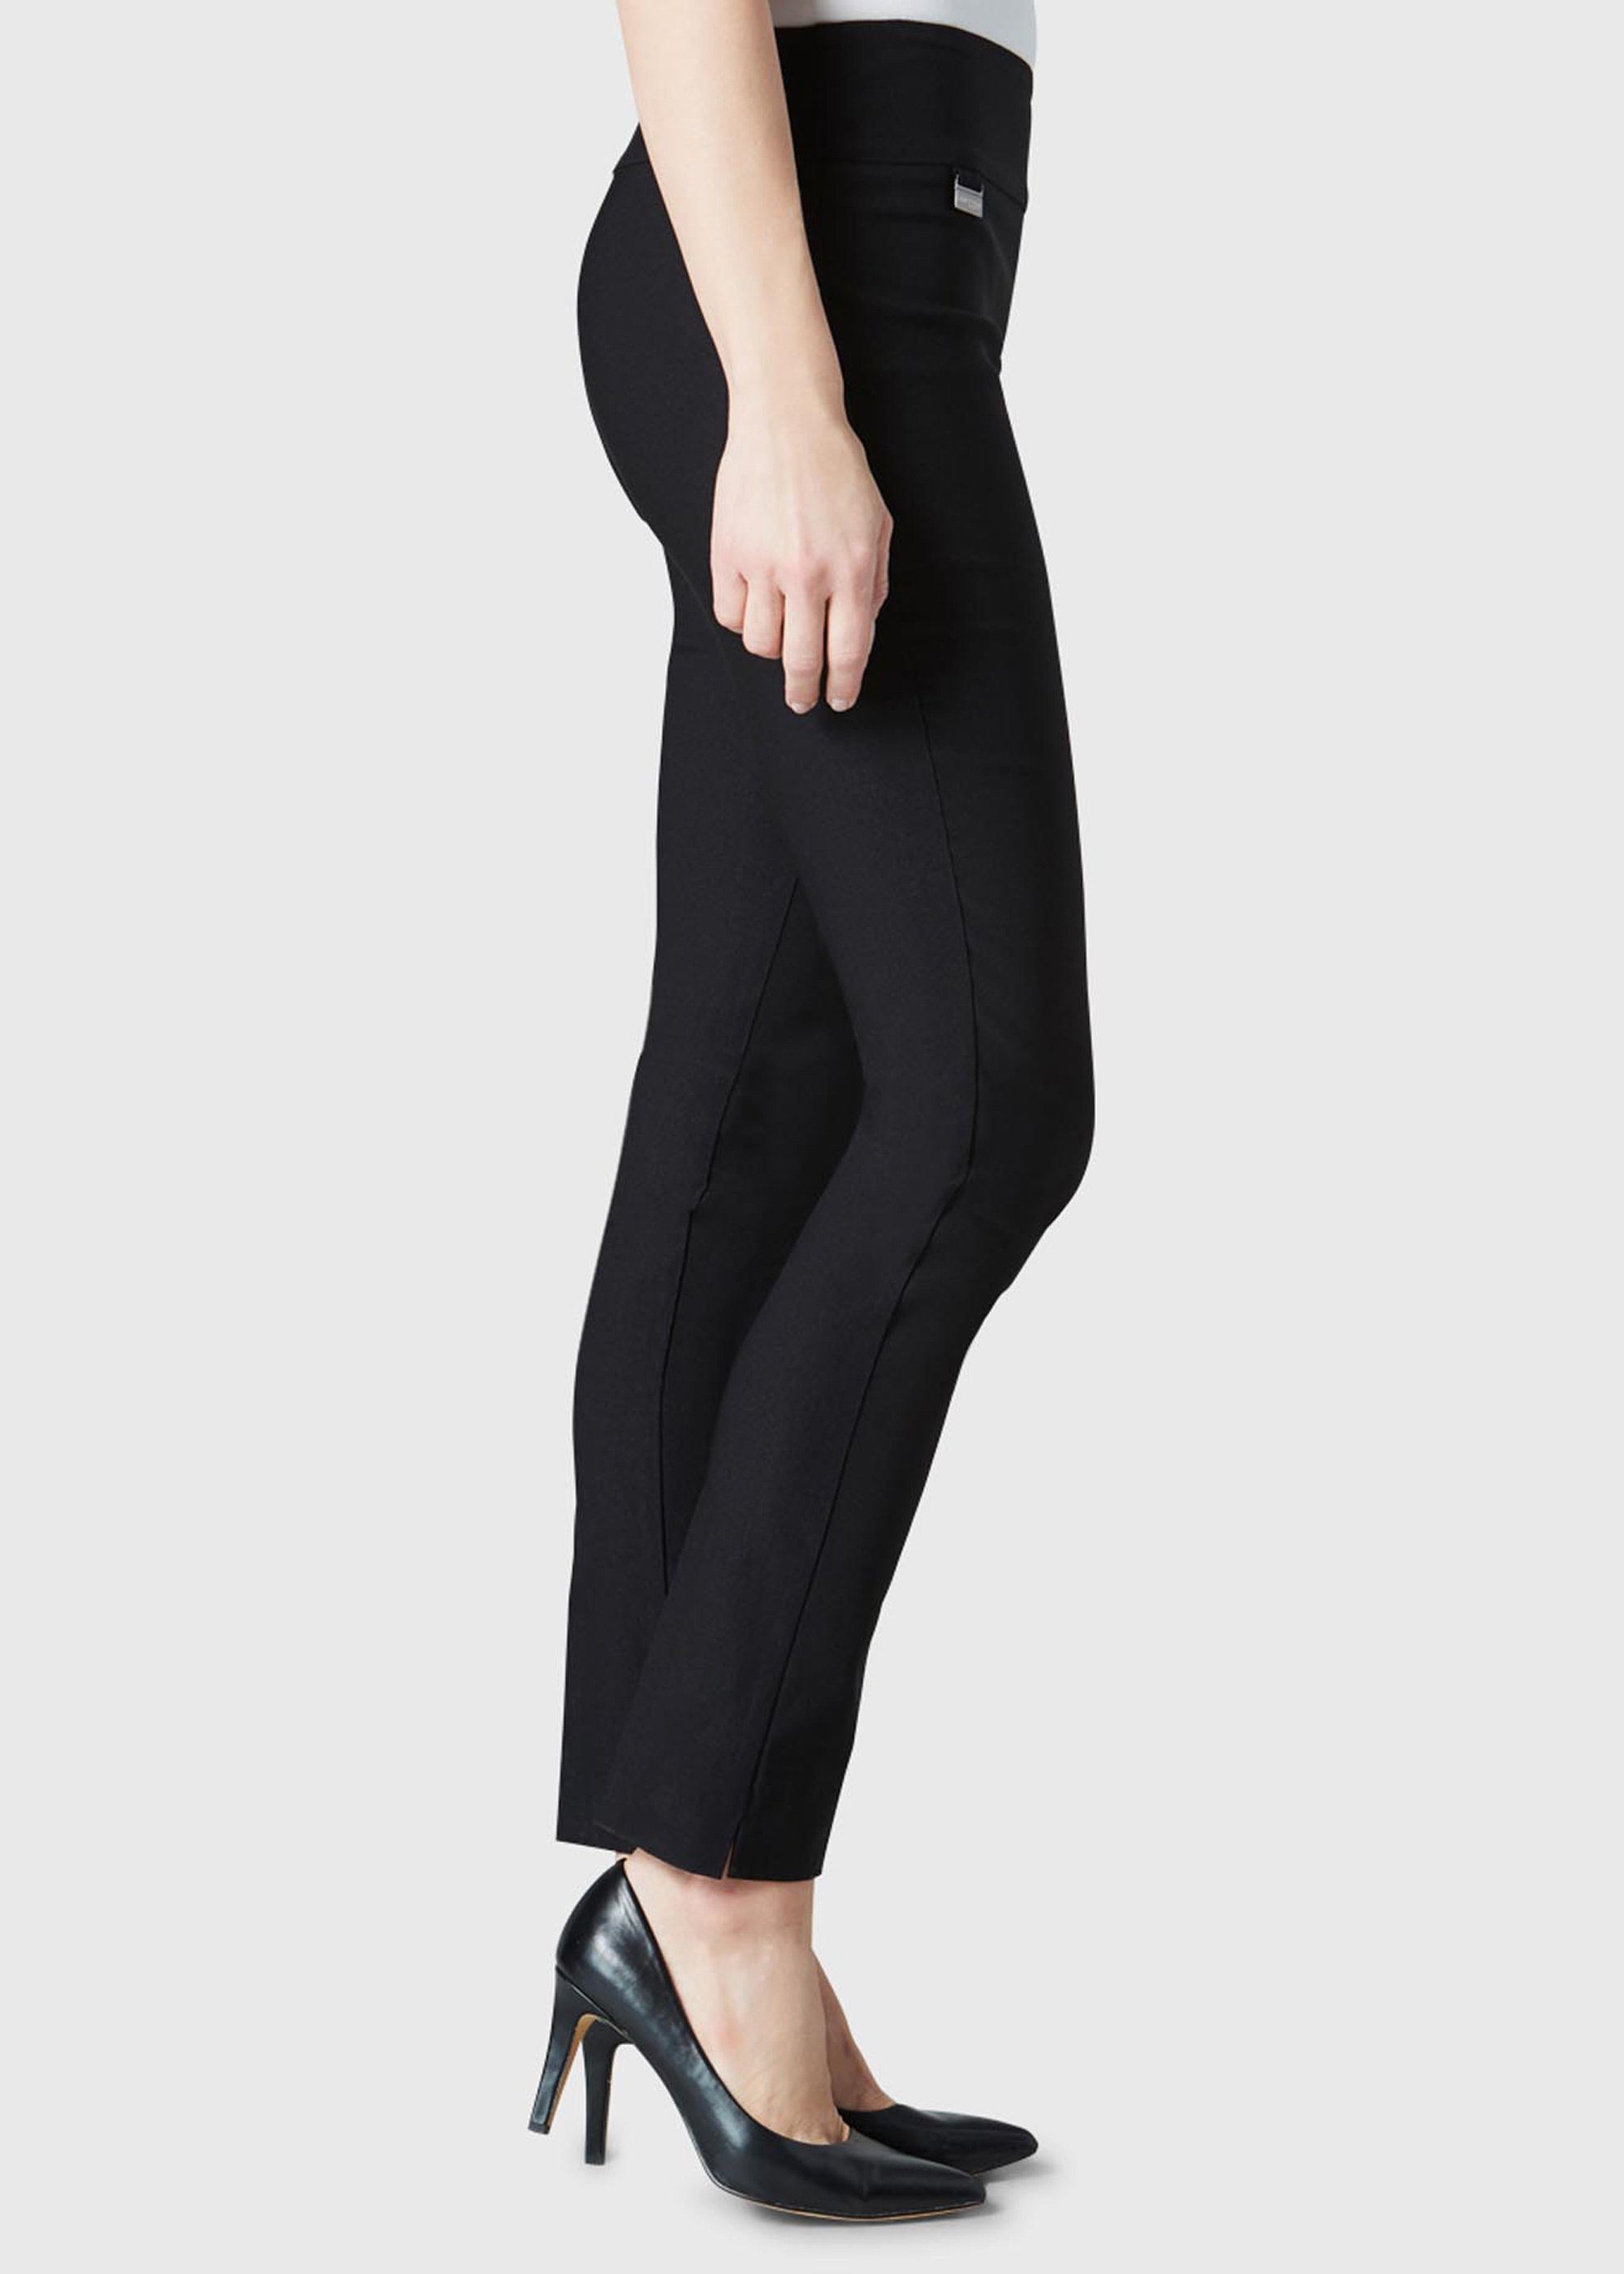 Slim fitting Perfect L schwarz Chinohose Pants Magical Lisette